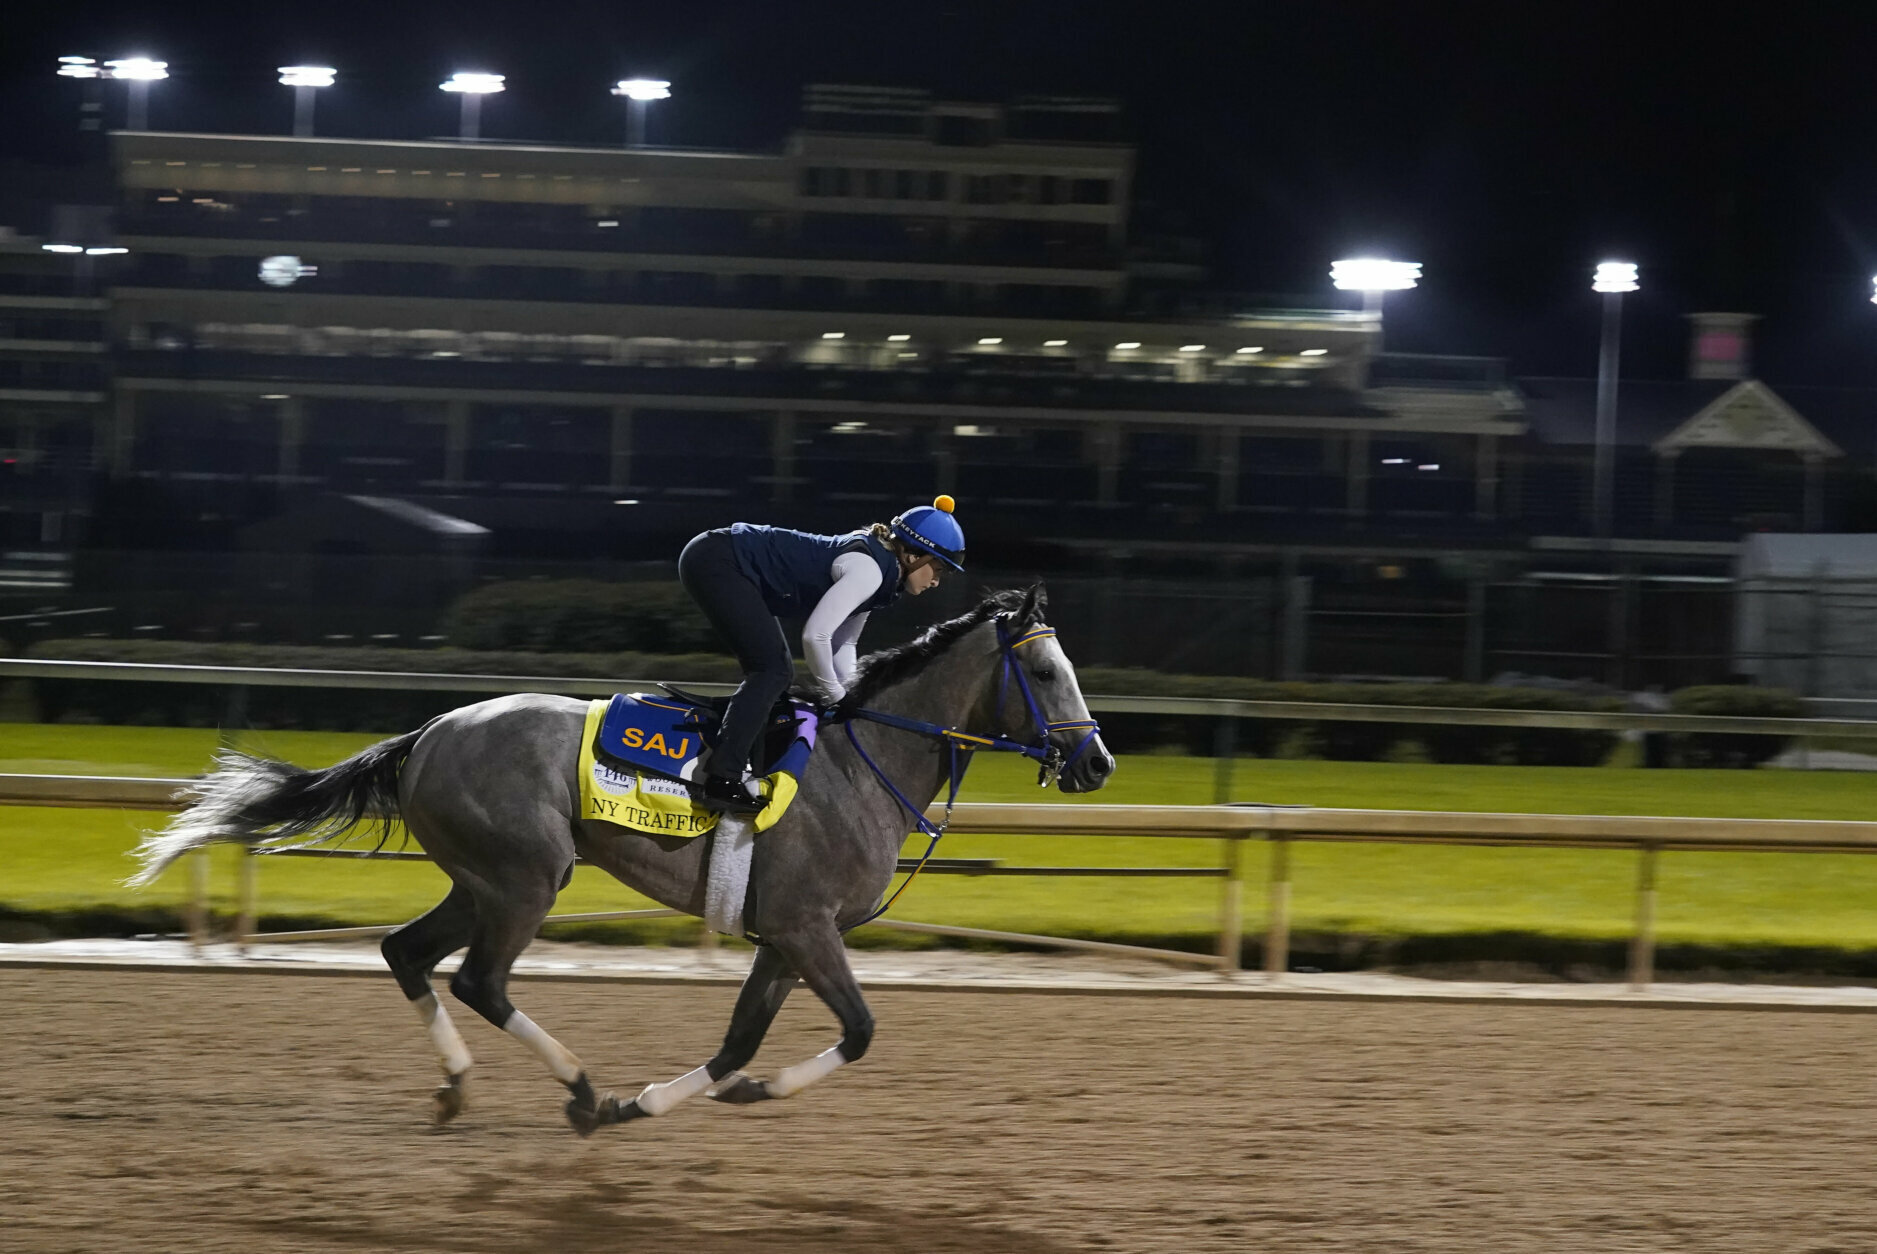 Kentucky Derby entry Ny Traffic runs during a workout at Churchill Downs, Friday, Sept. 4, 2020, in Louisville, Ky. The Kentucky Derby is scheduled for Saturday, Sept. 5th. (AP Photo/Darron Cummings)